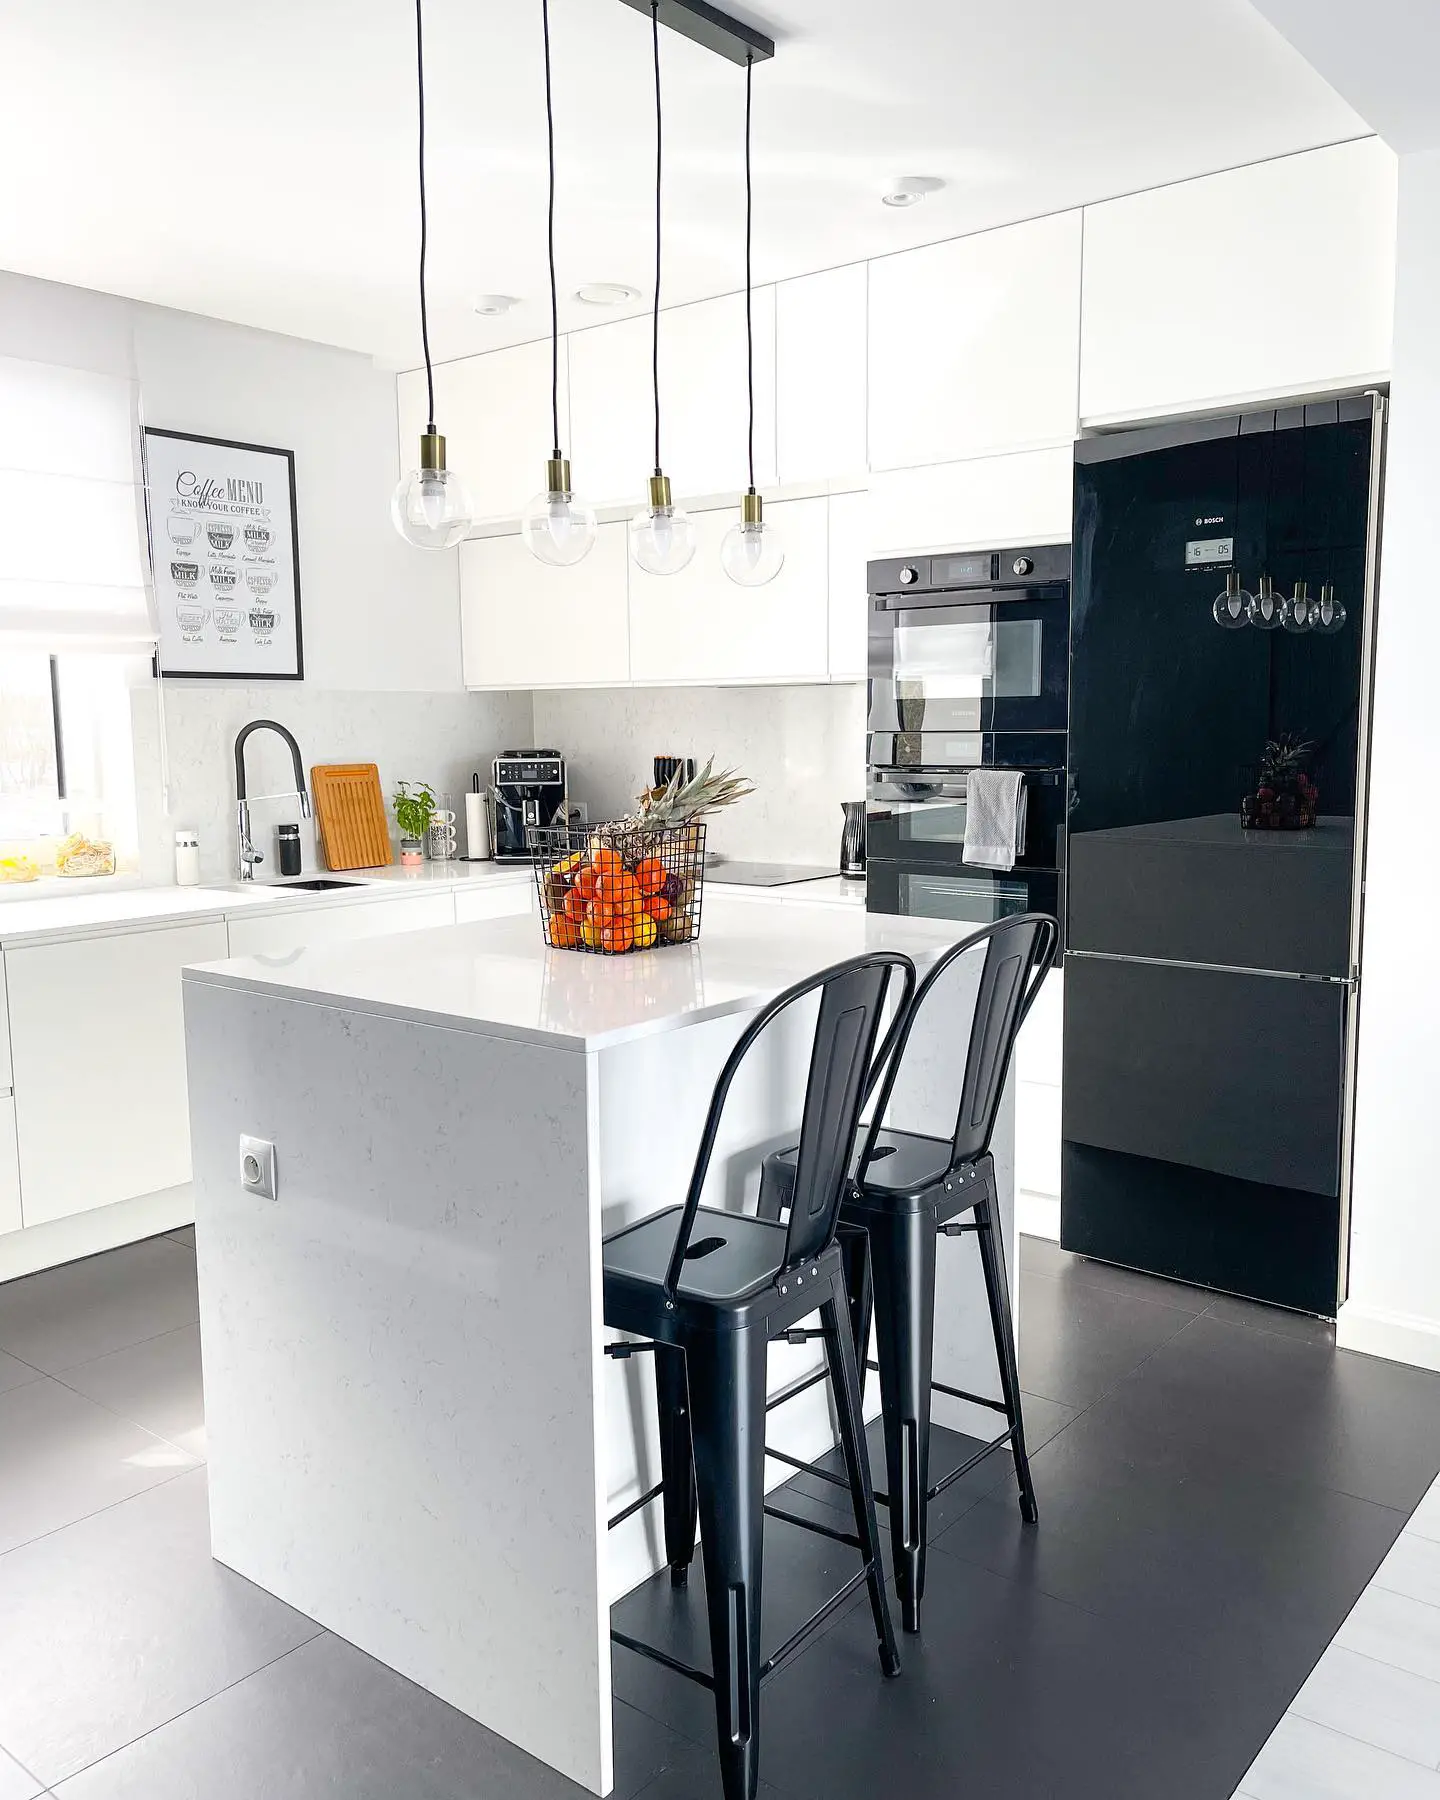 A kitchen with a black island and black stools.